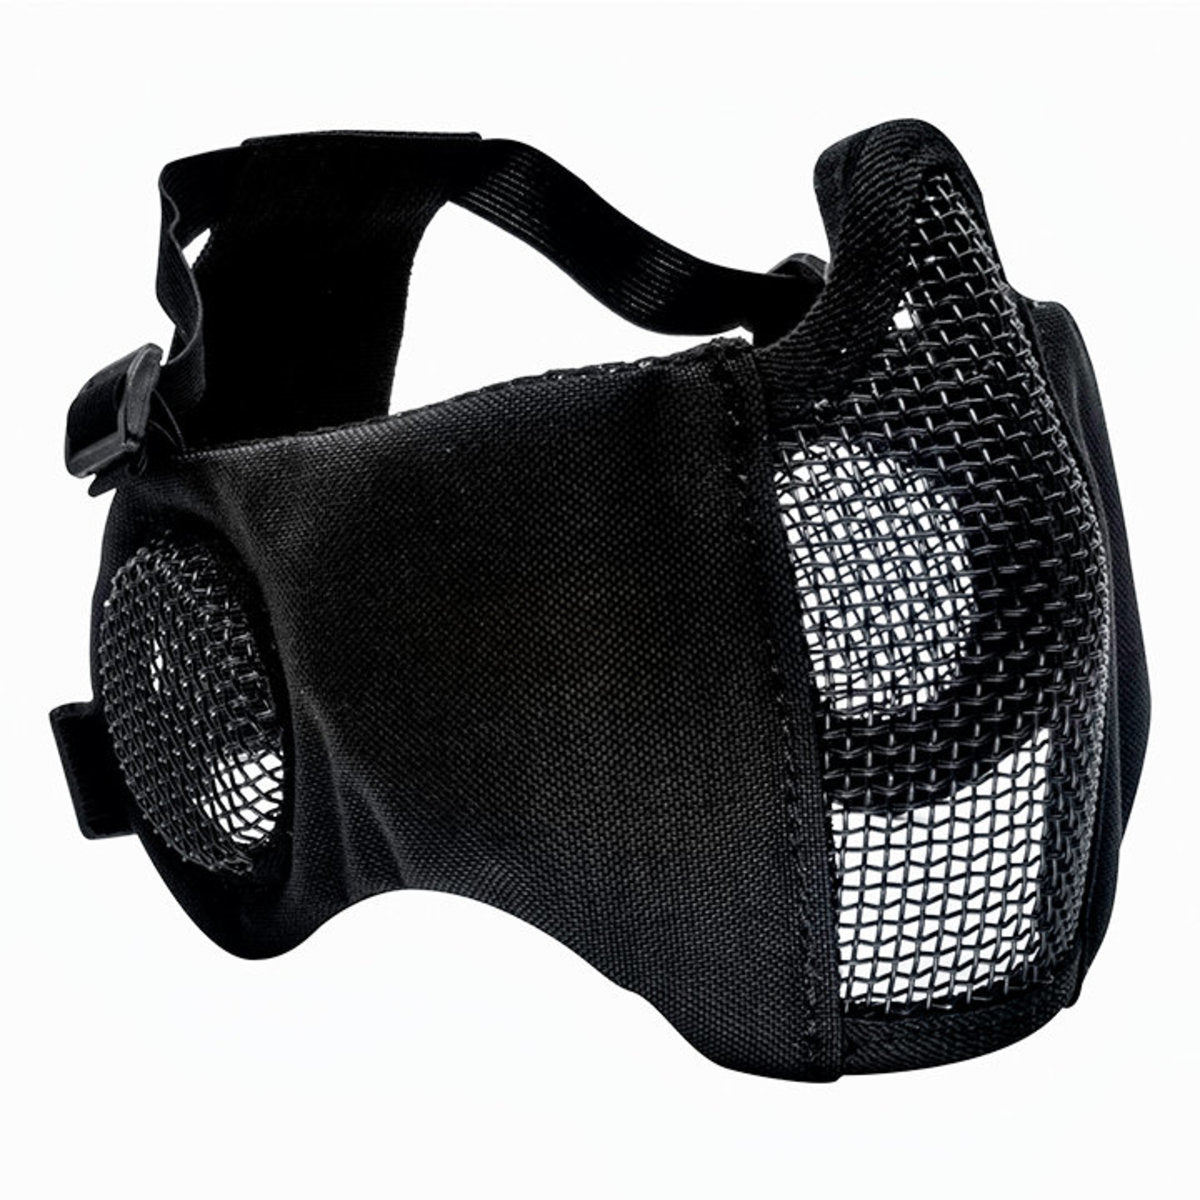 Valken Zulu Airsoft Mesh Mask (With ear coverage)